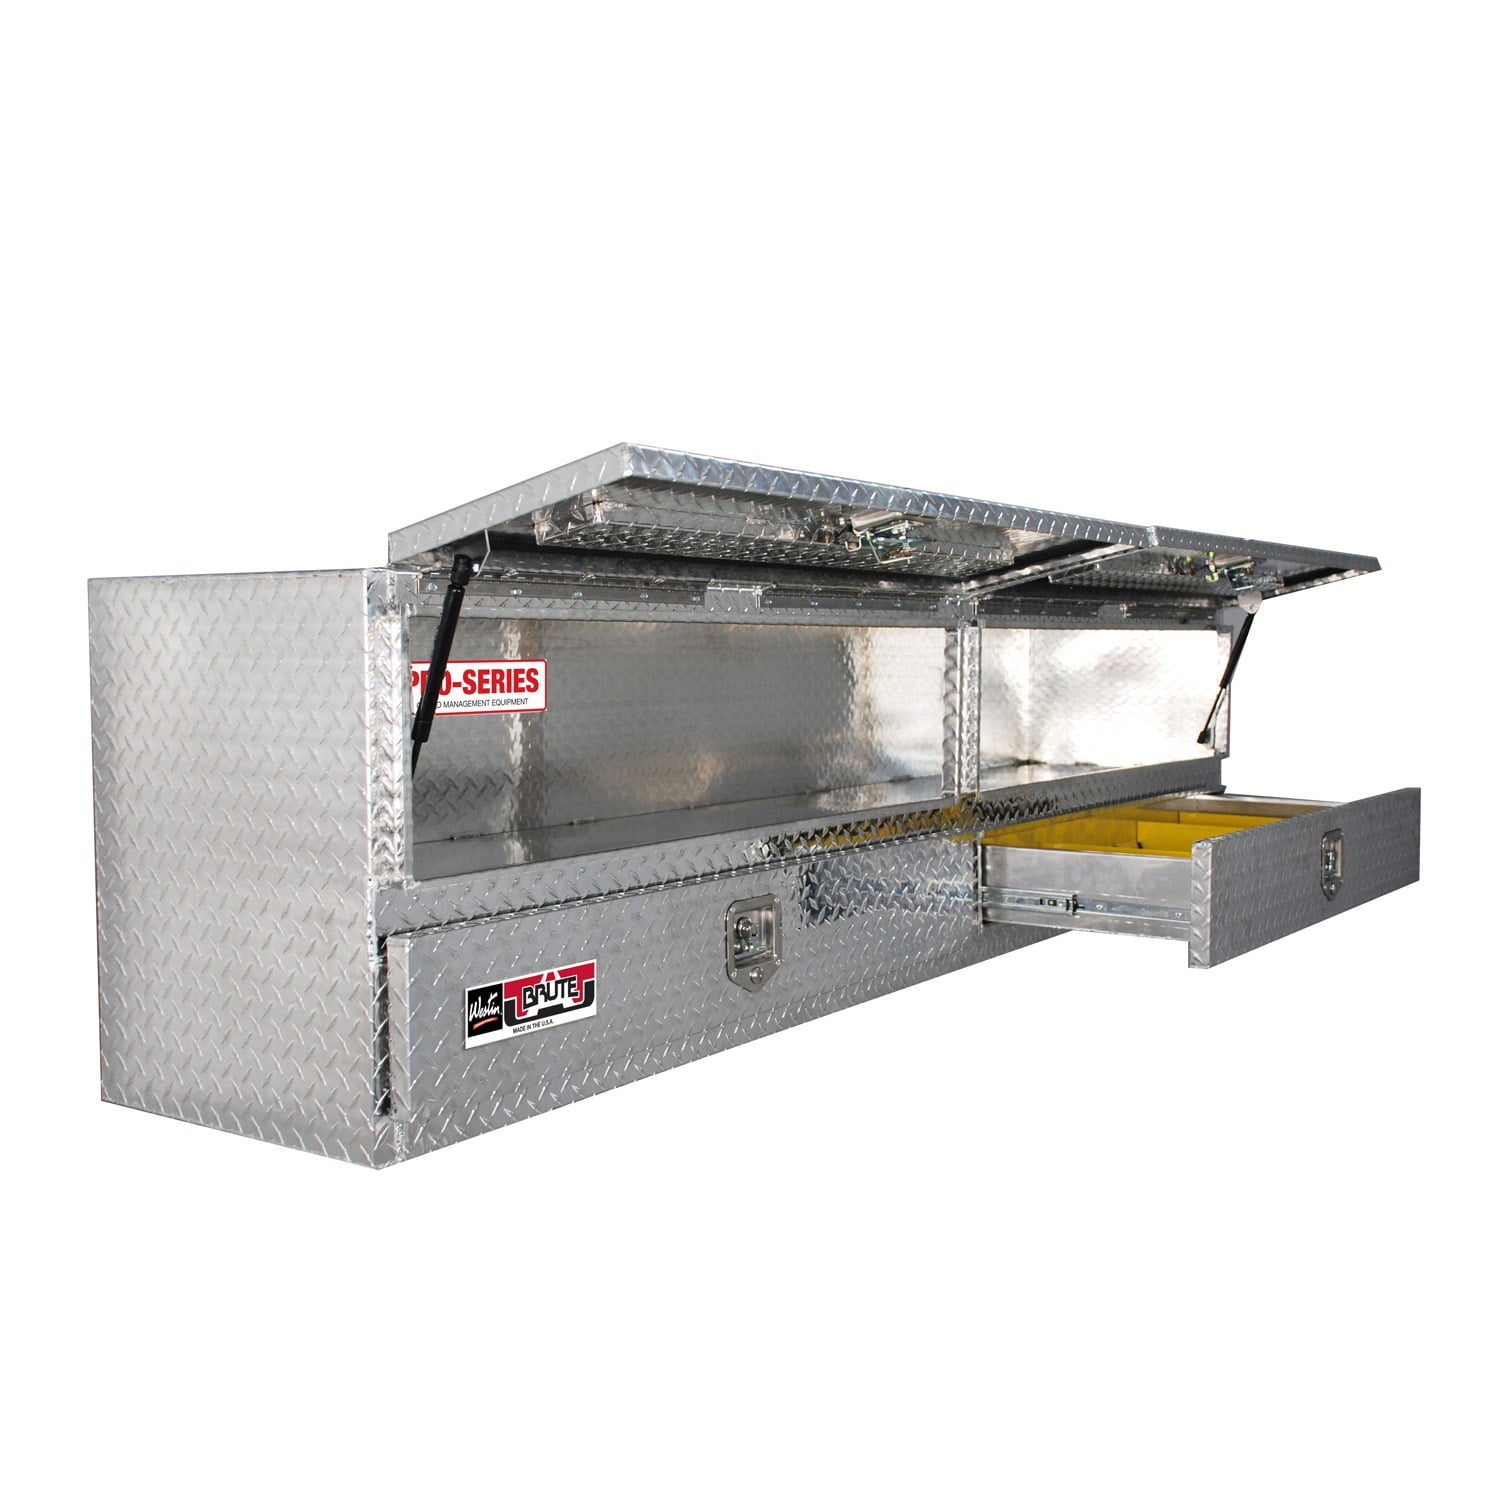 Brute 80-TB400-96D-BD Pro Series 96 High Capacity Stake Bed Contractor Polished Aluminum Tool Box with Bottom Drawers 